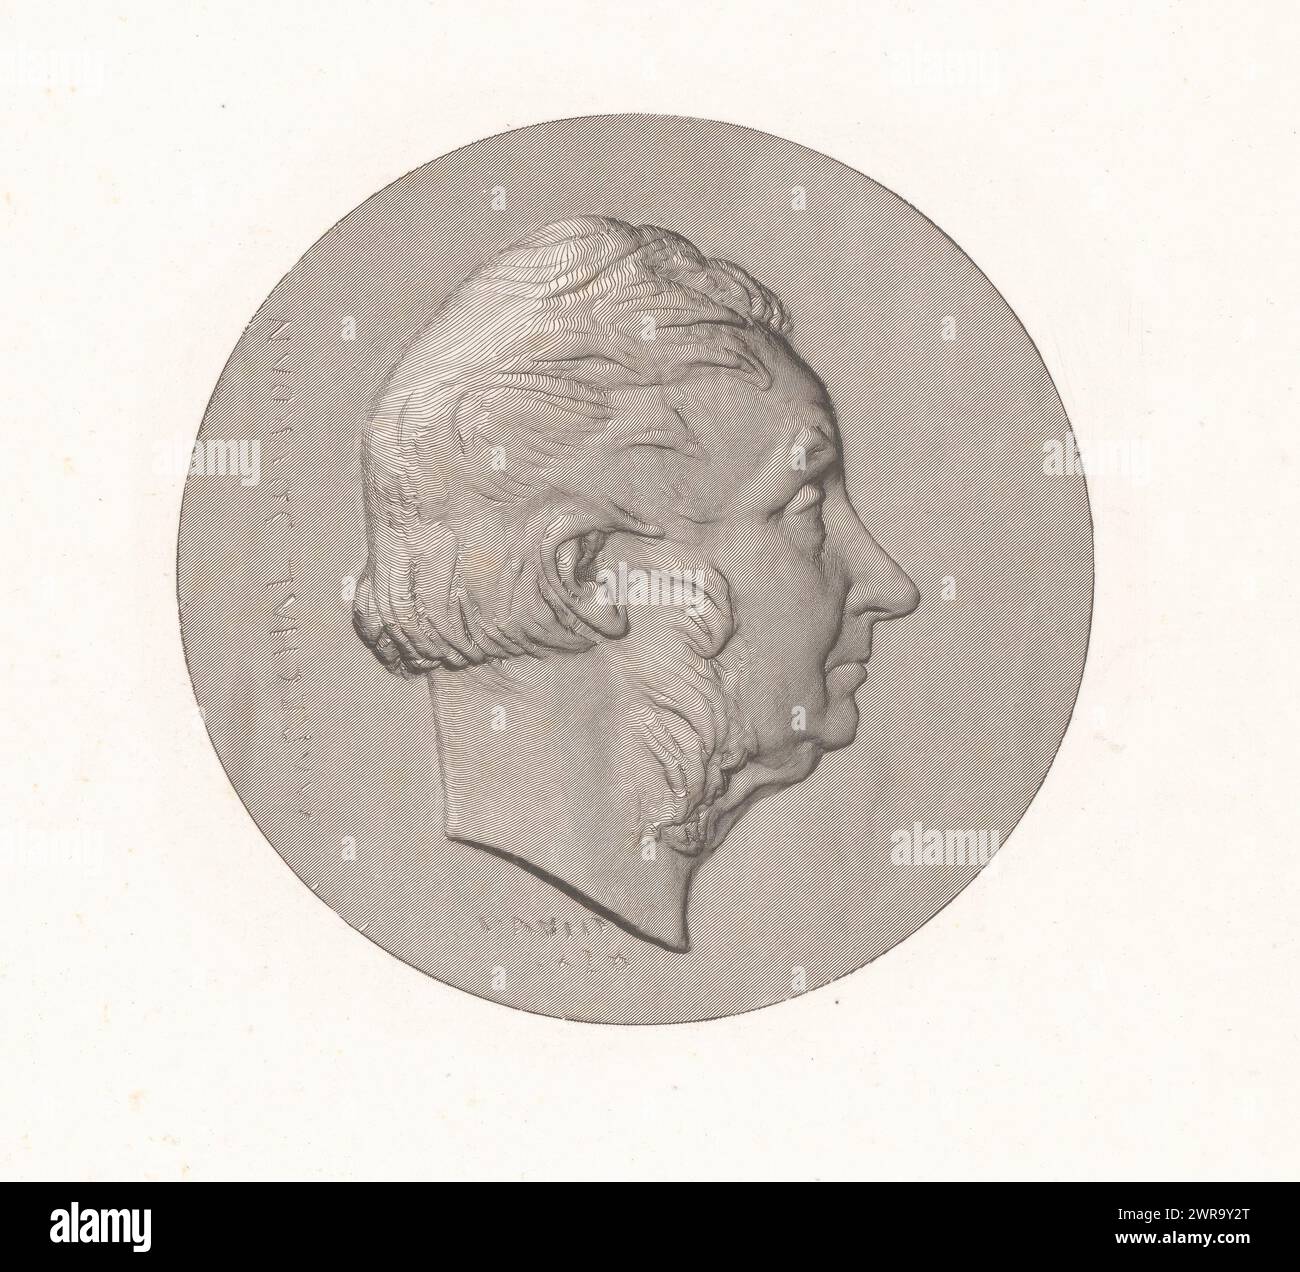 Medal with portrait of Jean-Baptiste Jourdan, Marechal Jourdan (title on object), Series of medallions with prominent figures from the early nineteenth century (series title), print maker: Achille Collas, (possibly), Pierre Jean David d'Angers, France, in or after 1828, paper, height 243 mm × width 218 mm, print Stock Photo